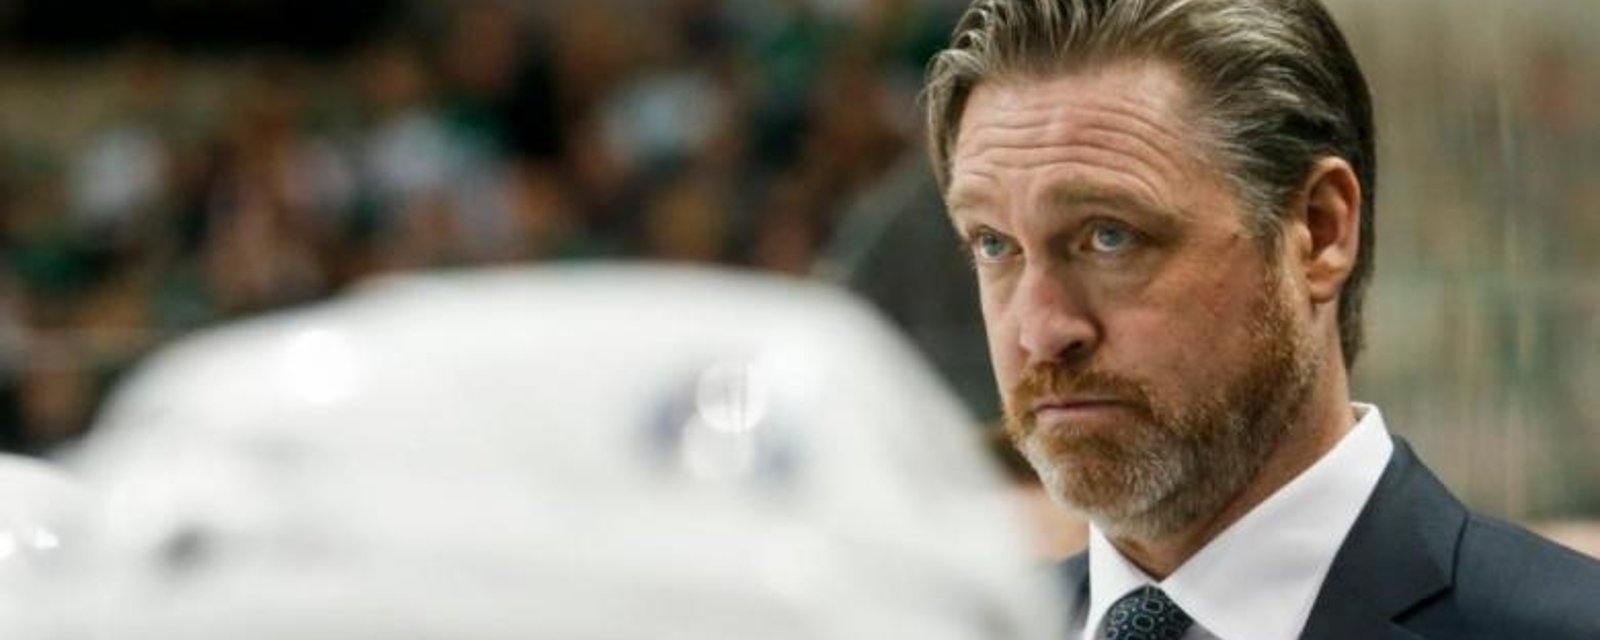 Rumor: Patrick Roy will soon be back with a new NHL team.